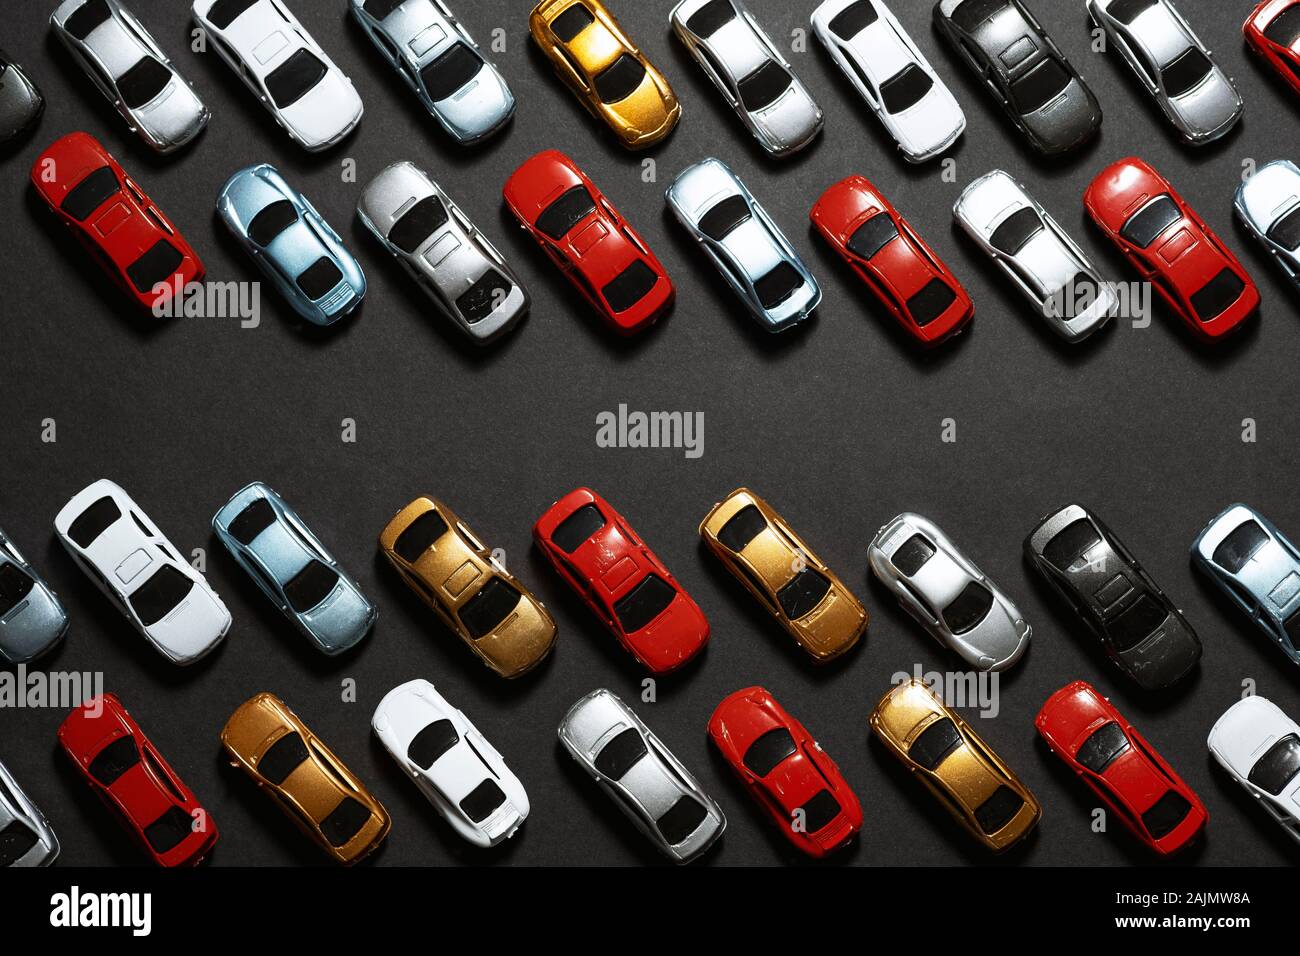 Top view of Parked toy cars on a black background like a car parking lot. Stock Photo